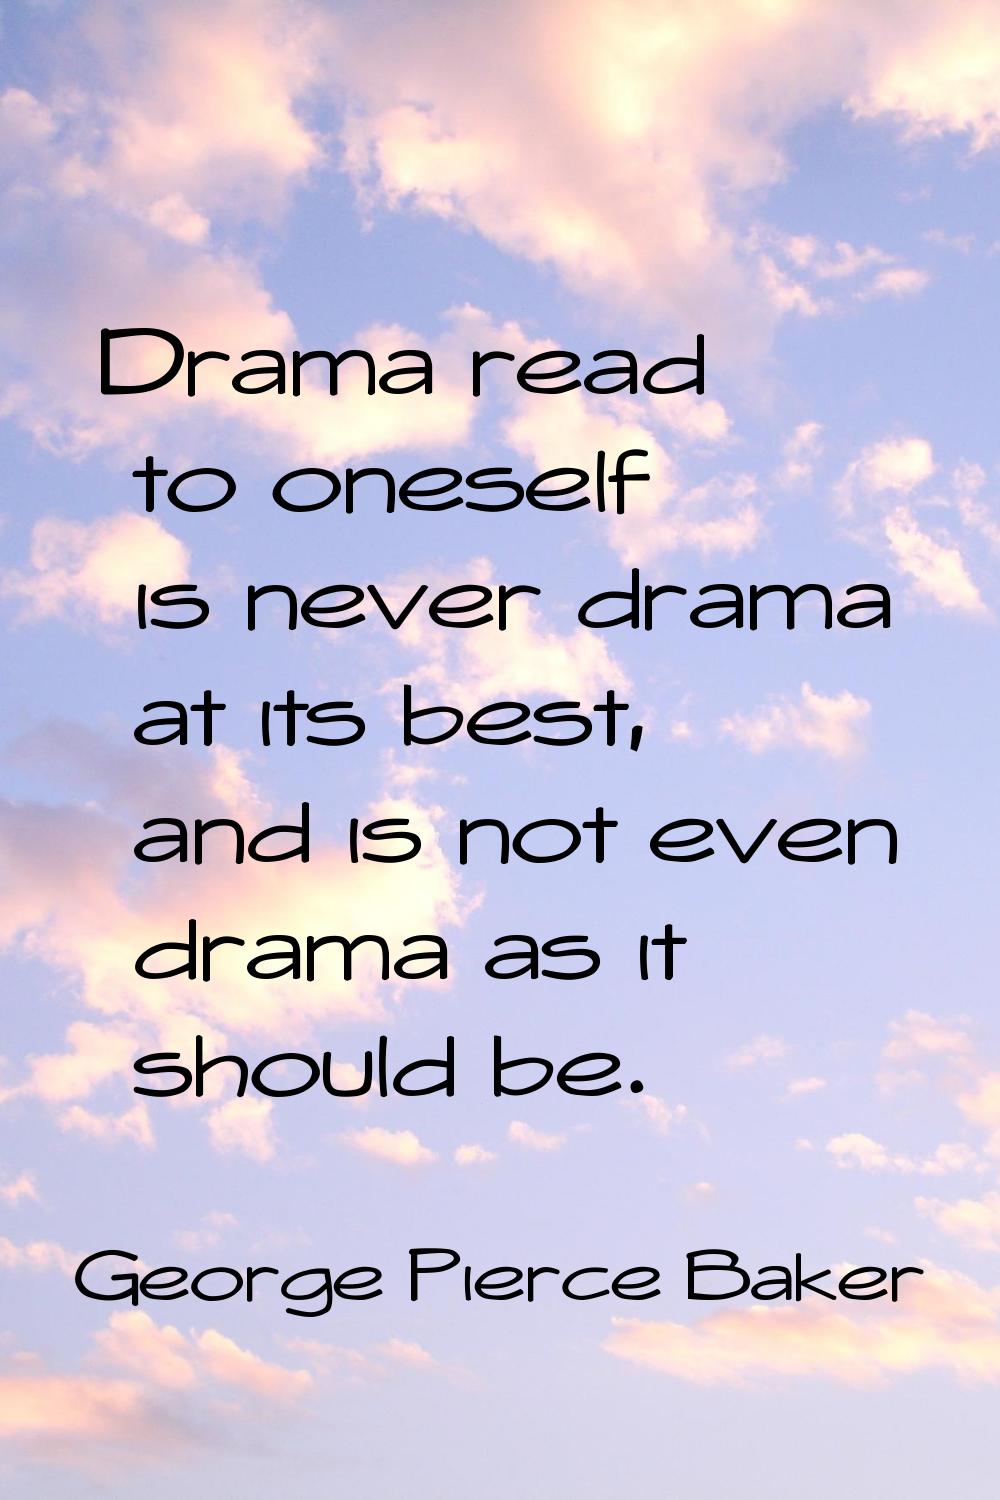 Drama read to oneself is never drama at its best, and is not even drama as it should be.